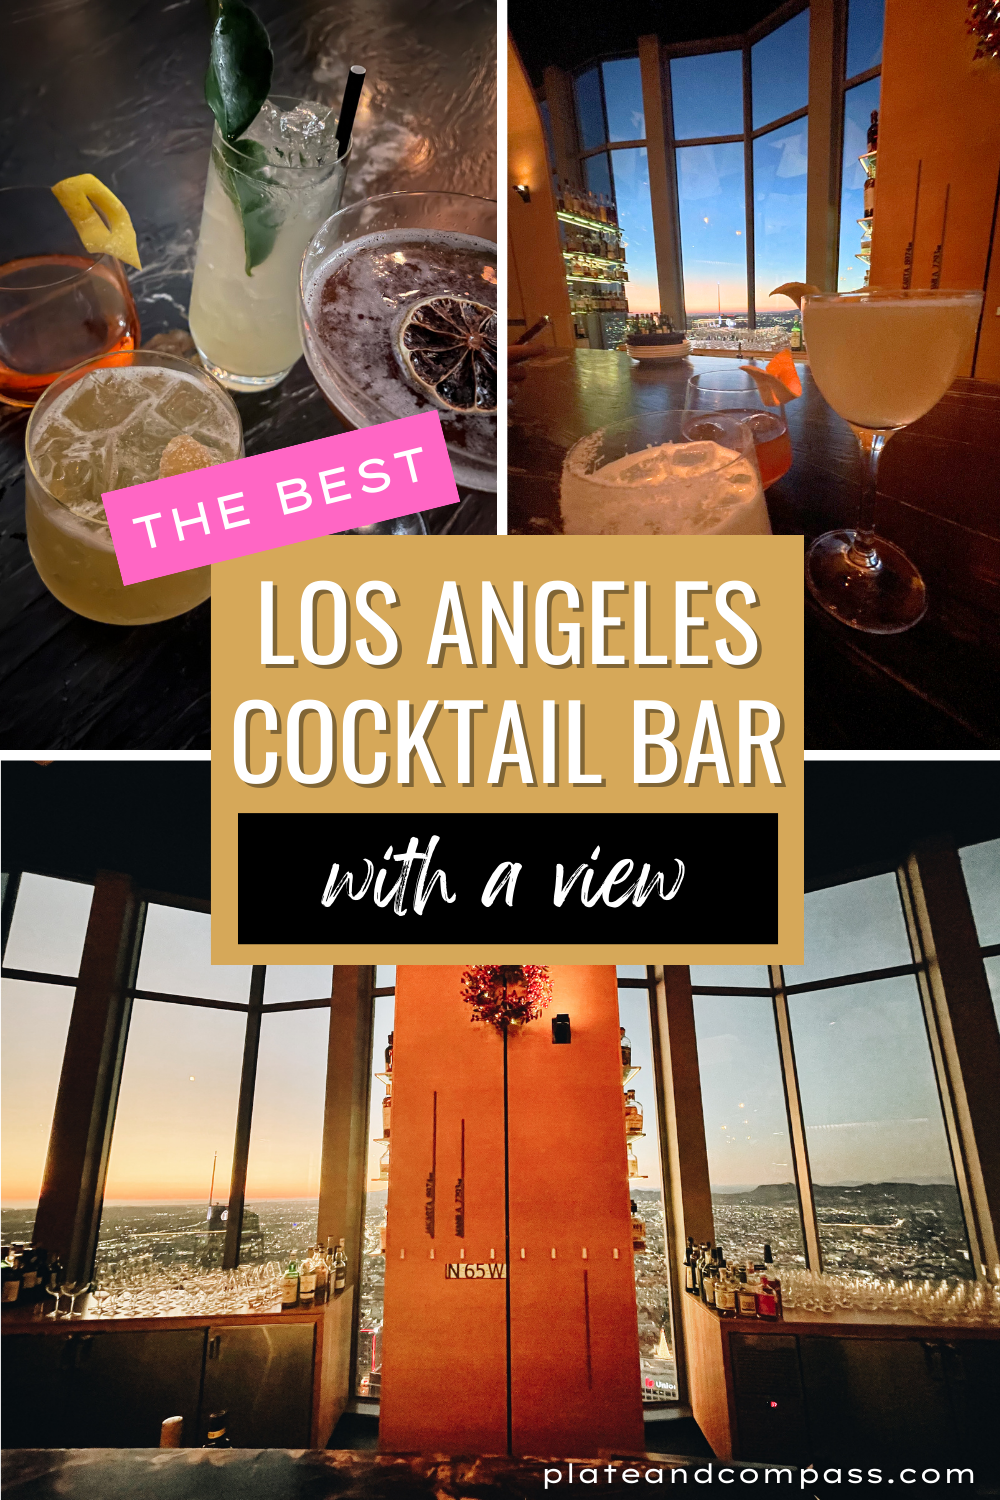 Pinterest image of drinks and view from th 71 above bar